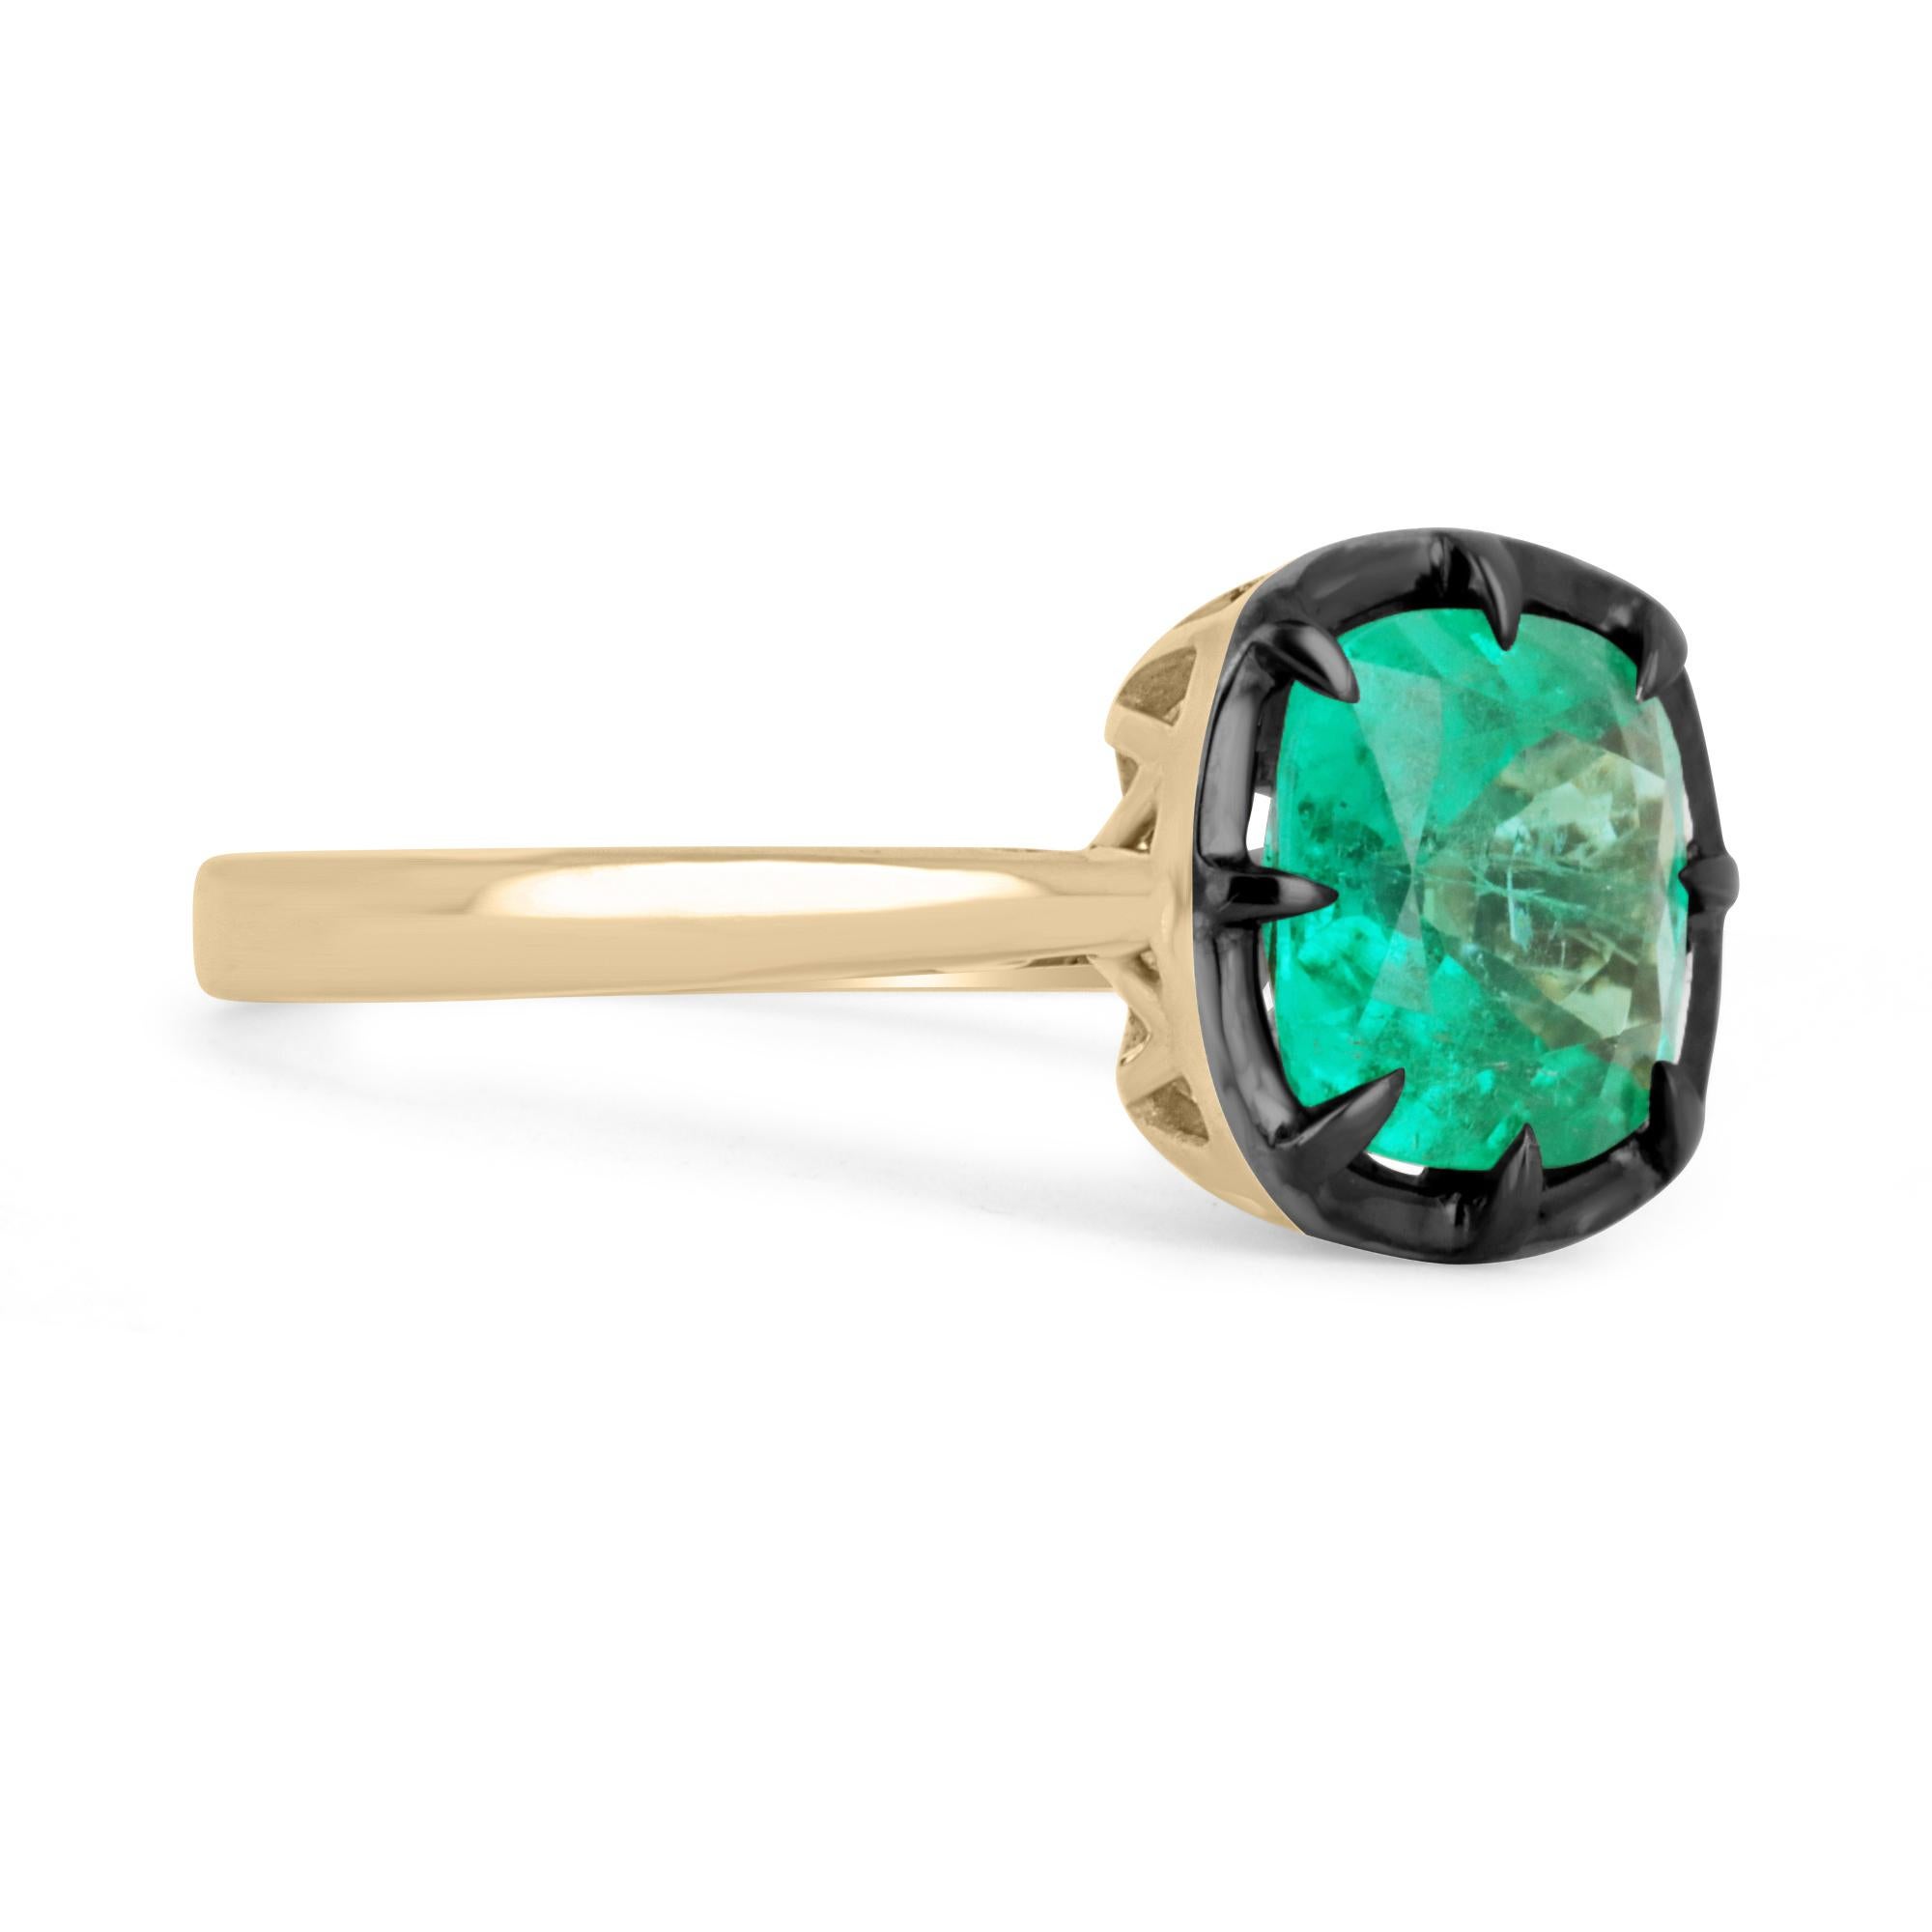 Displayed is a Colombian emerald Georgian-styled solitaire Cushion-cut engagement or right-hand ring in 14K yellow gold. This gorgeous solitaire ring carries a full 3.0-carat emerald in a semi-bezel multiprong setting. Black rhodium highlights the